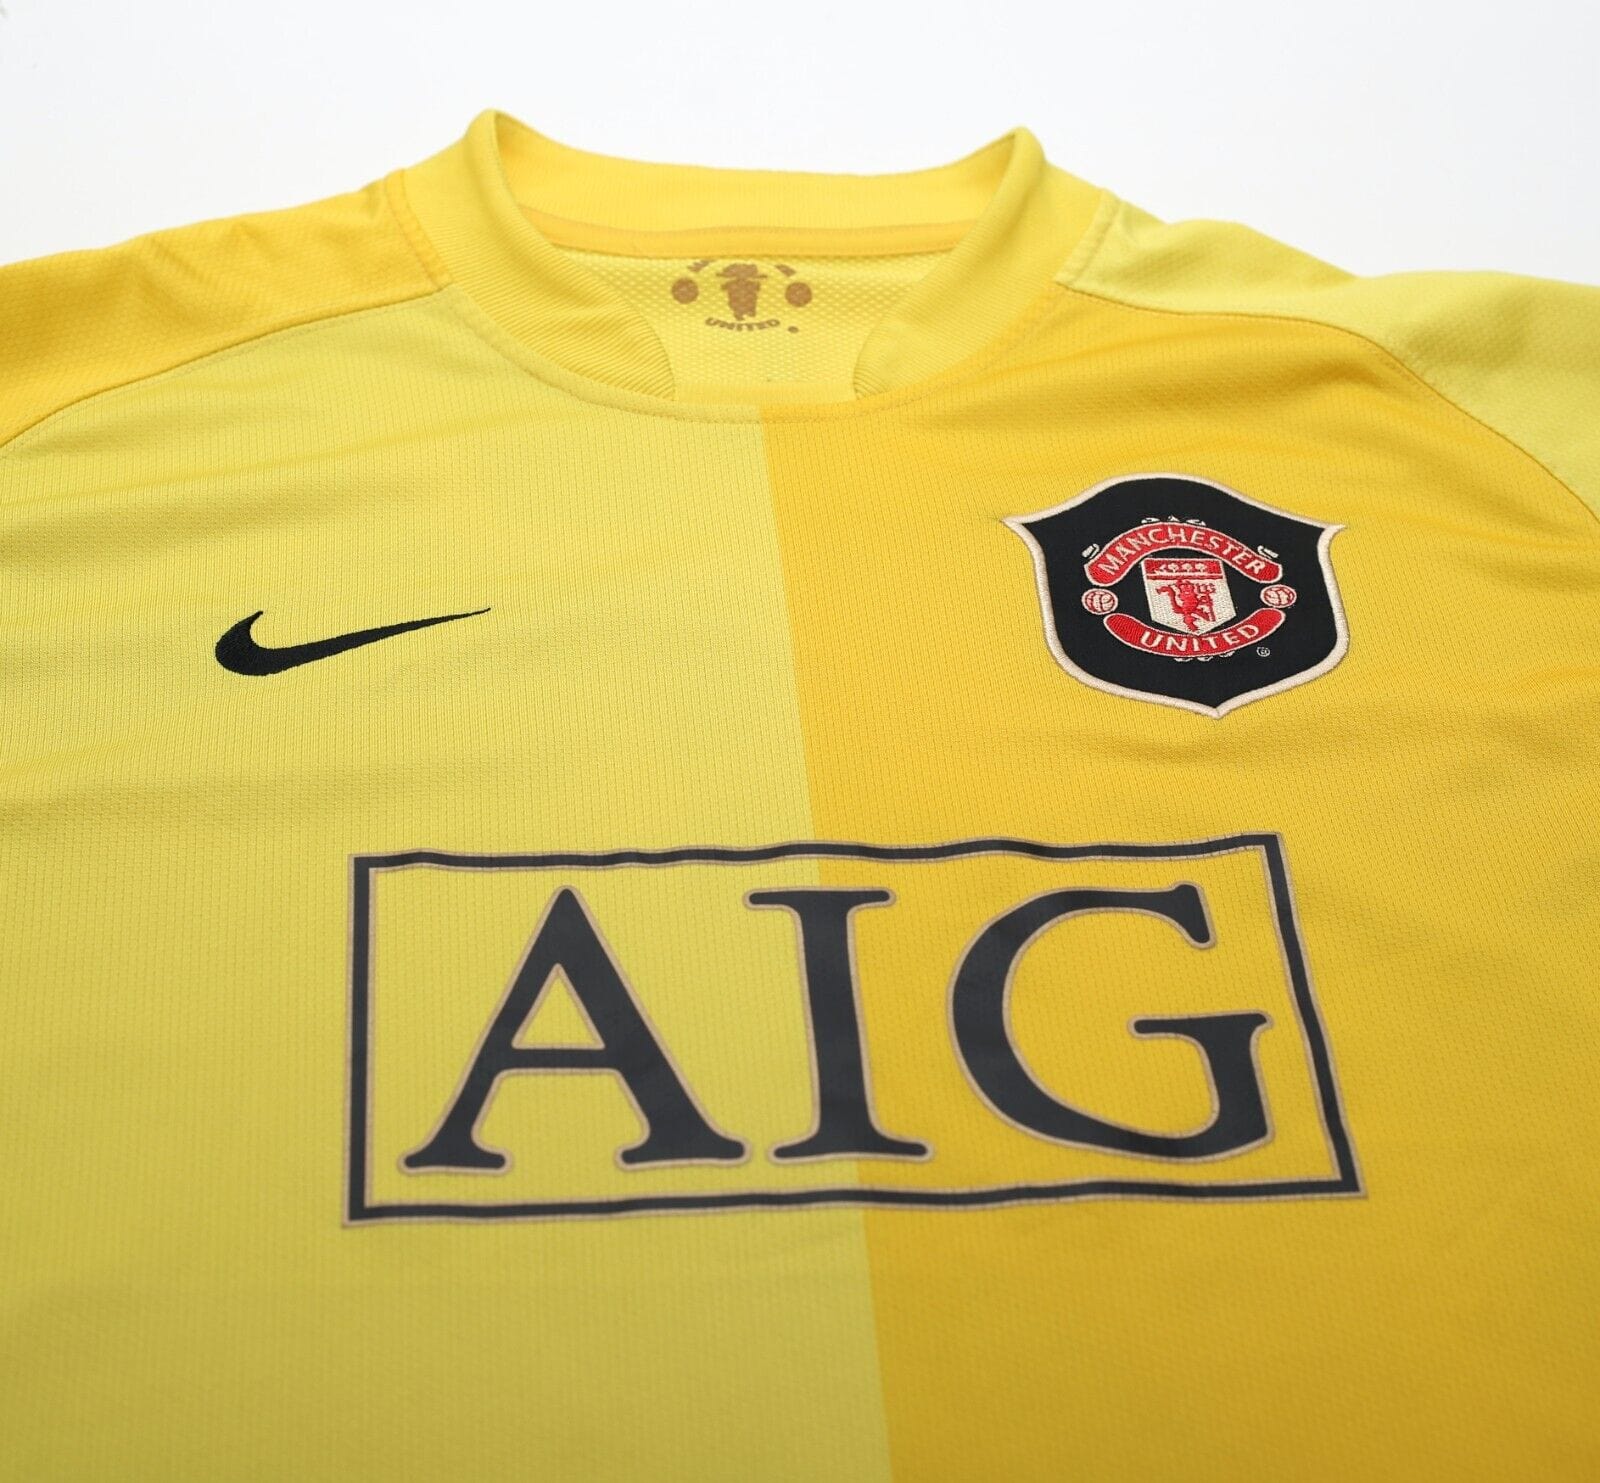 Classic Football Shirts - On this day 2006 we sold our first ever